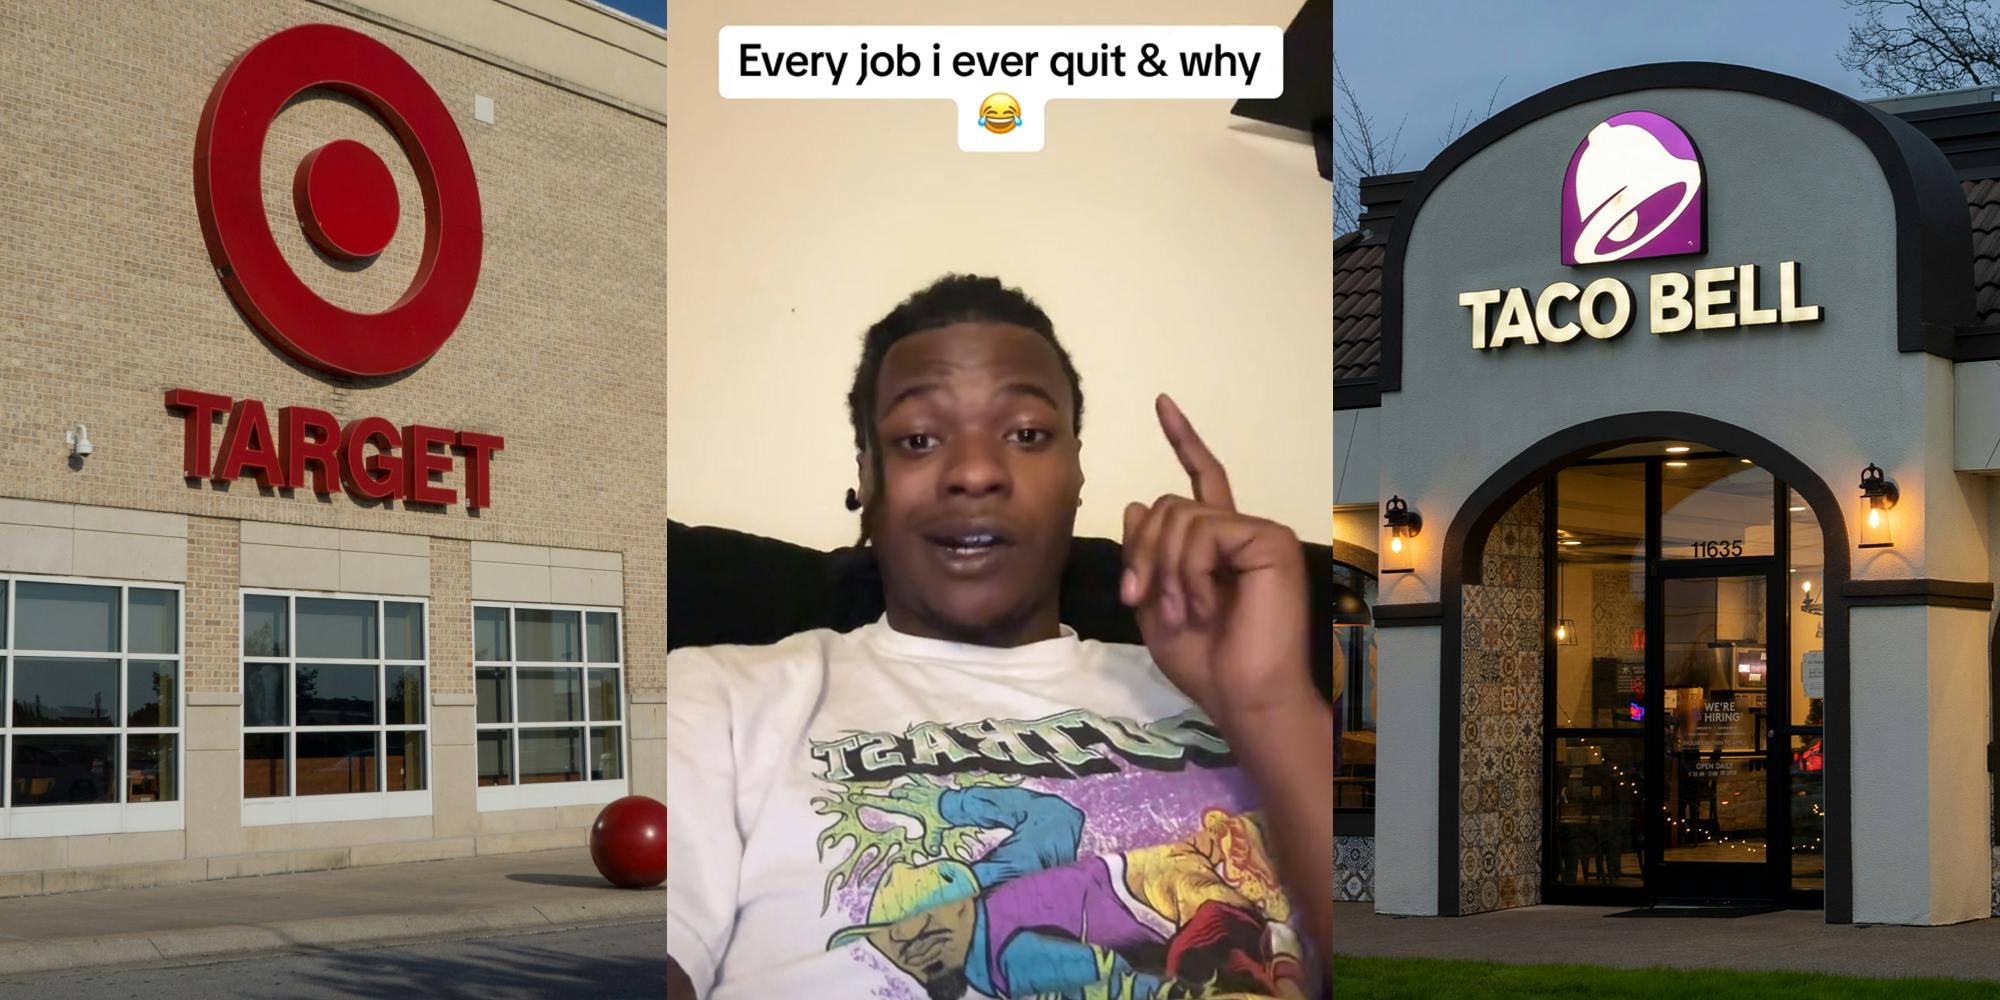 Target building with sign (l) worker with caption "Every job i ever quit & why" (c) Taco Bell building with sign (r)